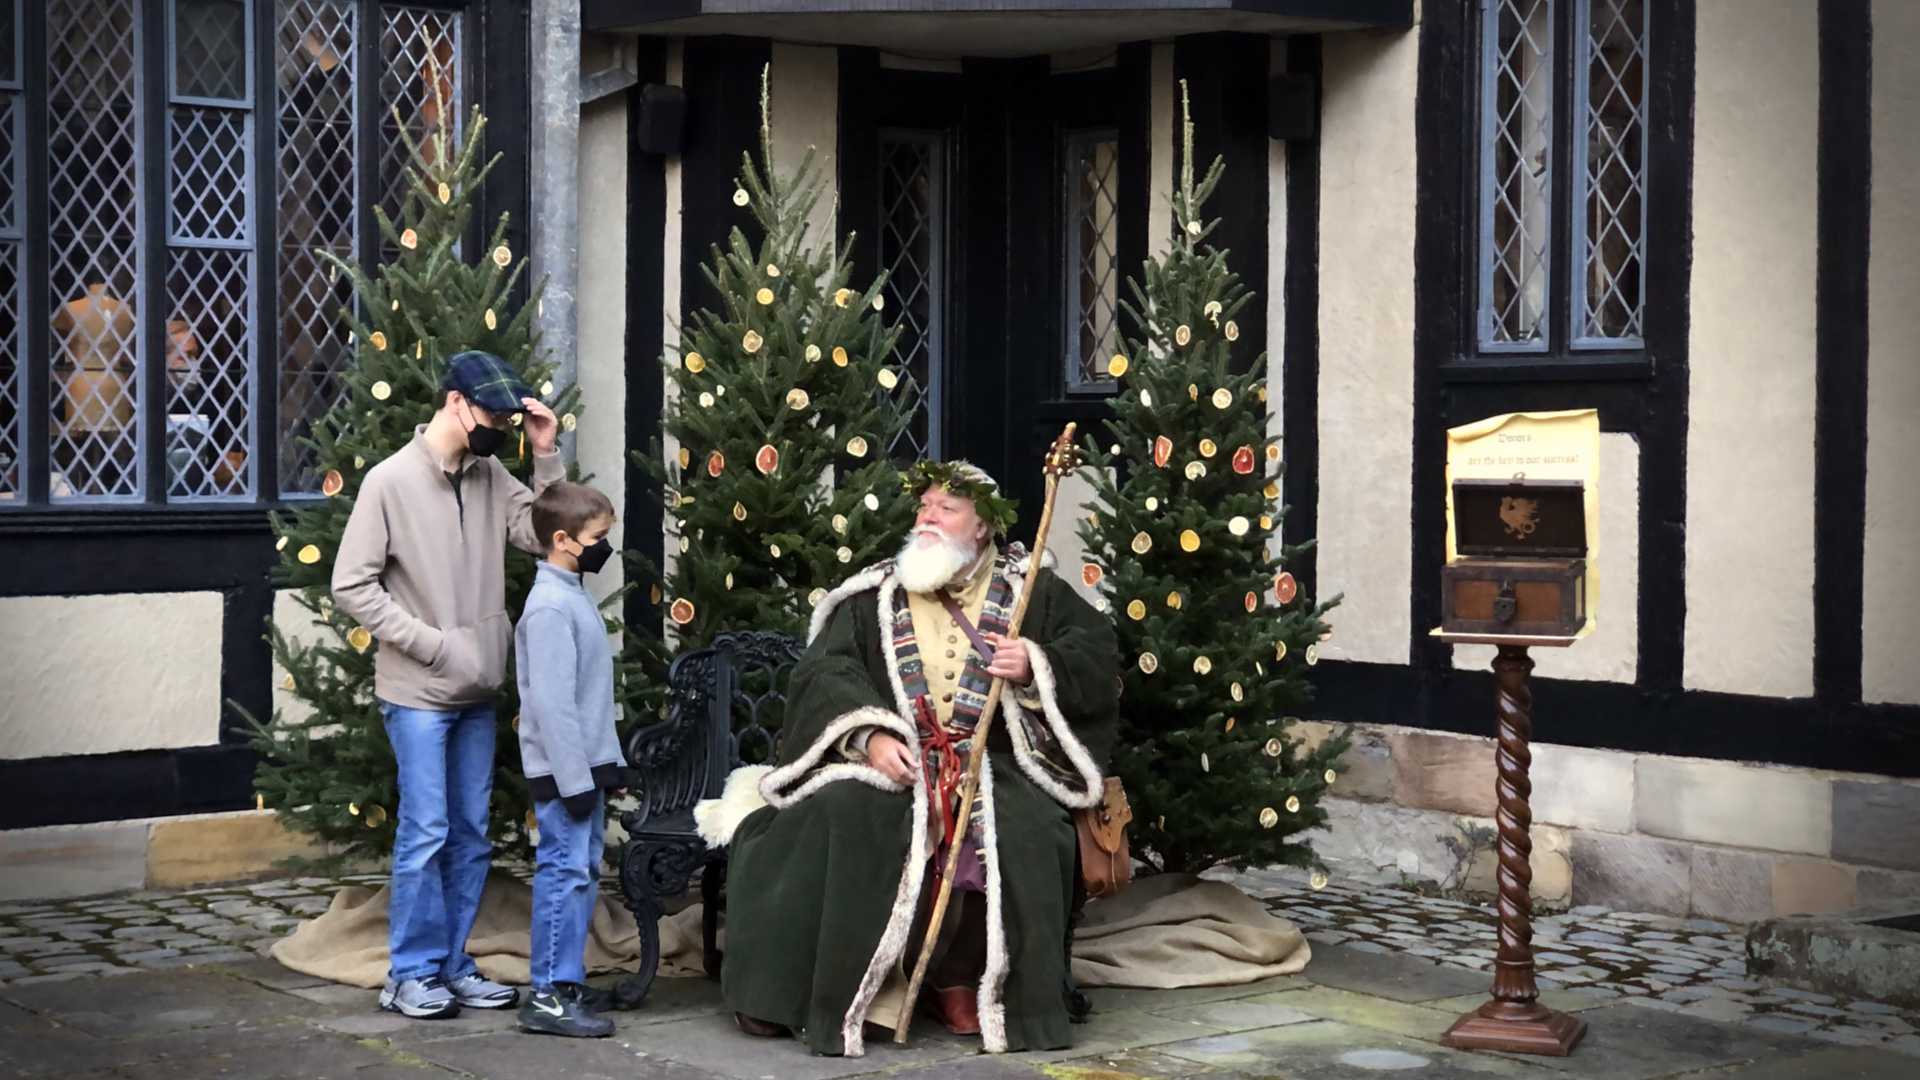 Father Christmas hearing children's wishes at a 15th Century Tudor Manor Estate.